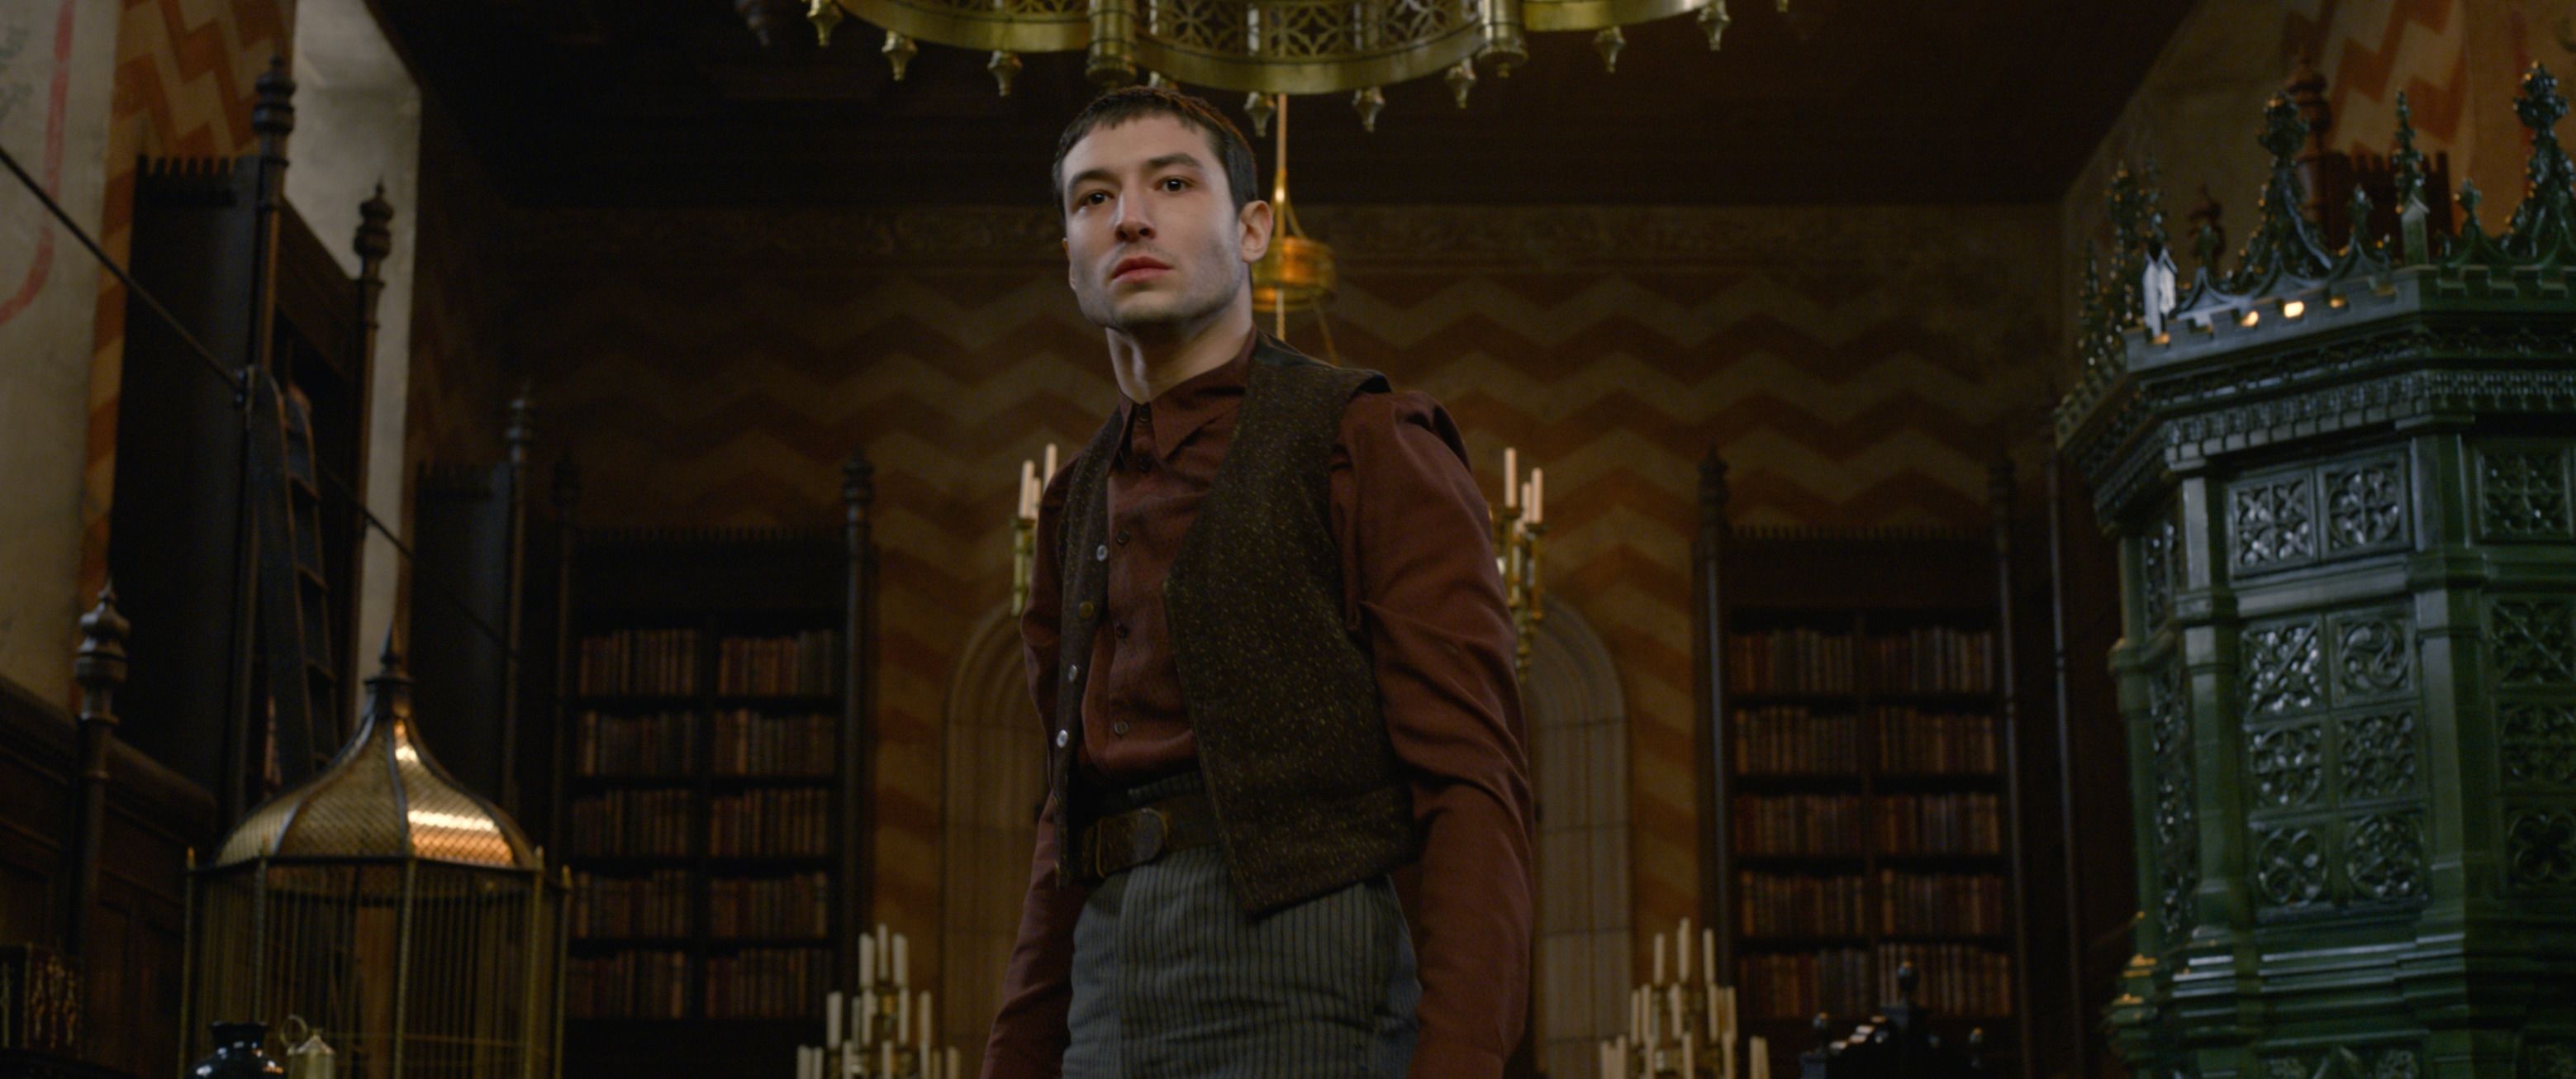 Credence Barebone Fantastic Beasts, Captivating Credence wallpapers, Intriguing storyline, Wizarding world, 3120x1310 Dual Screen Desktop